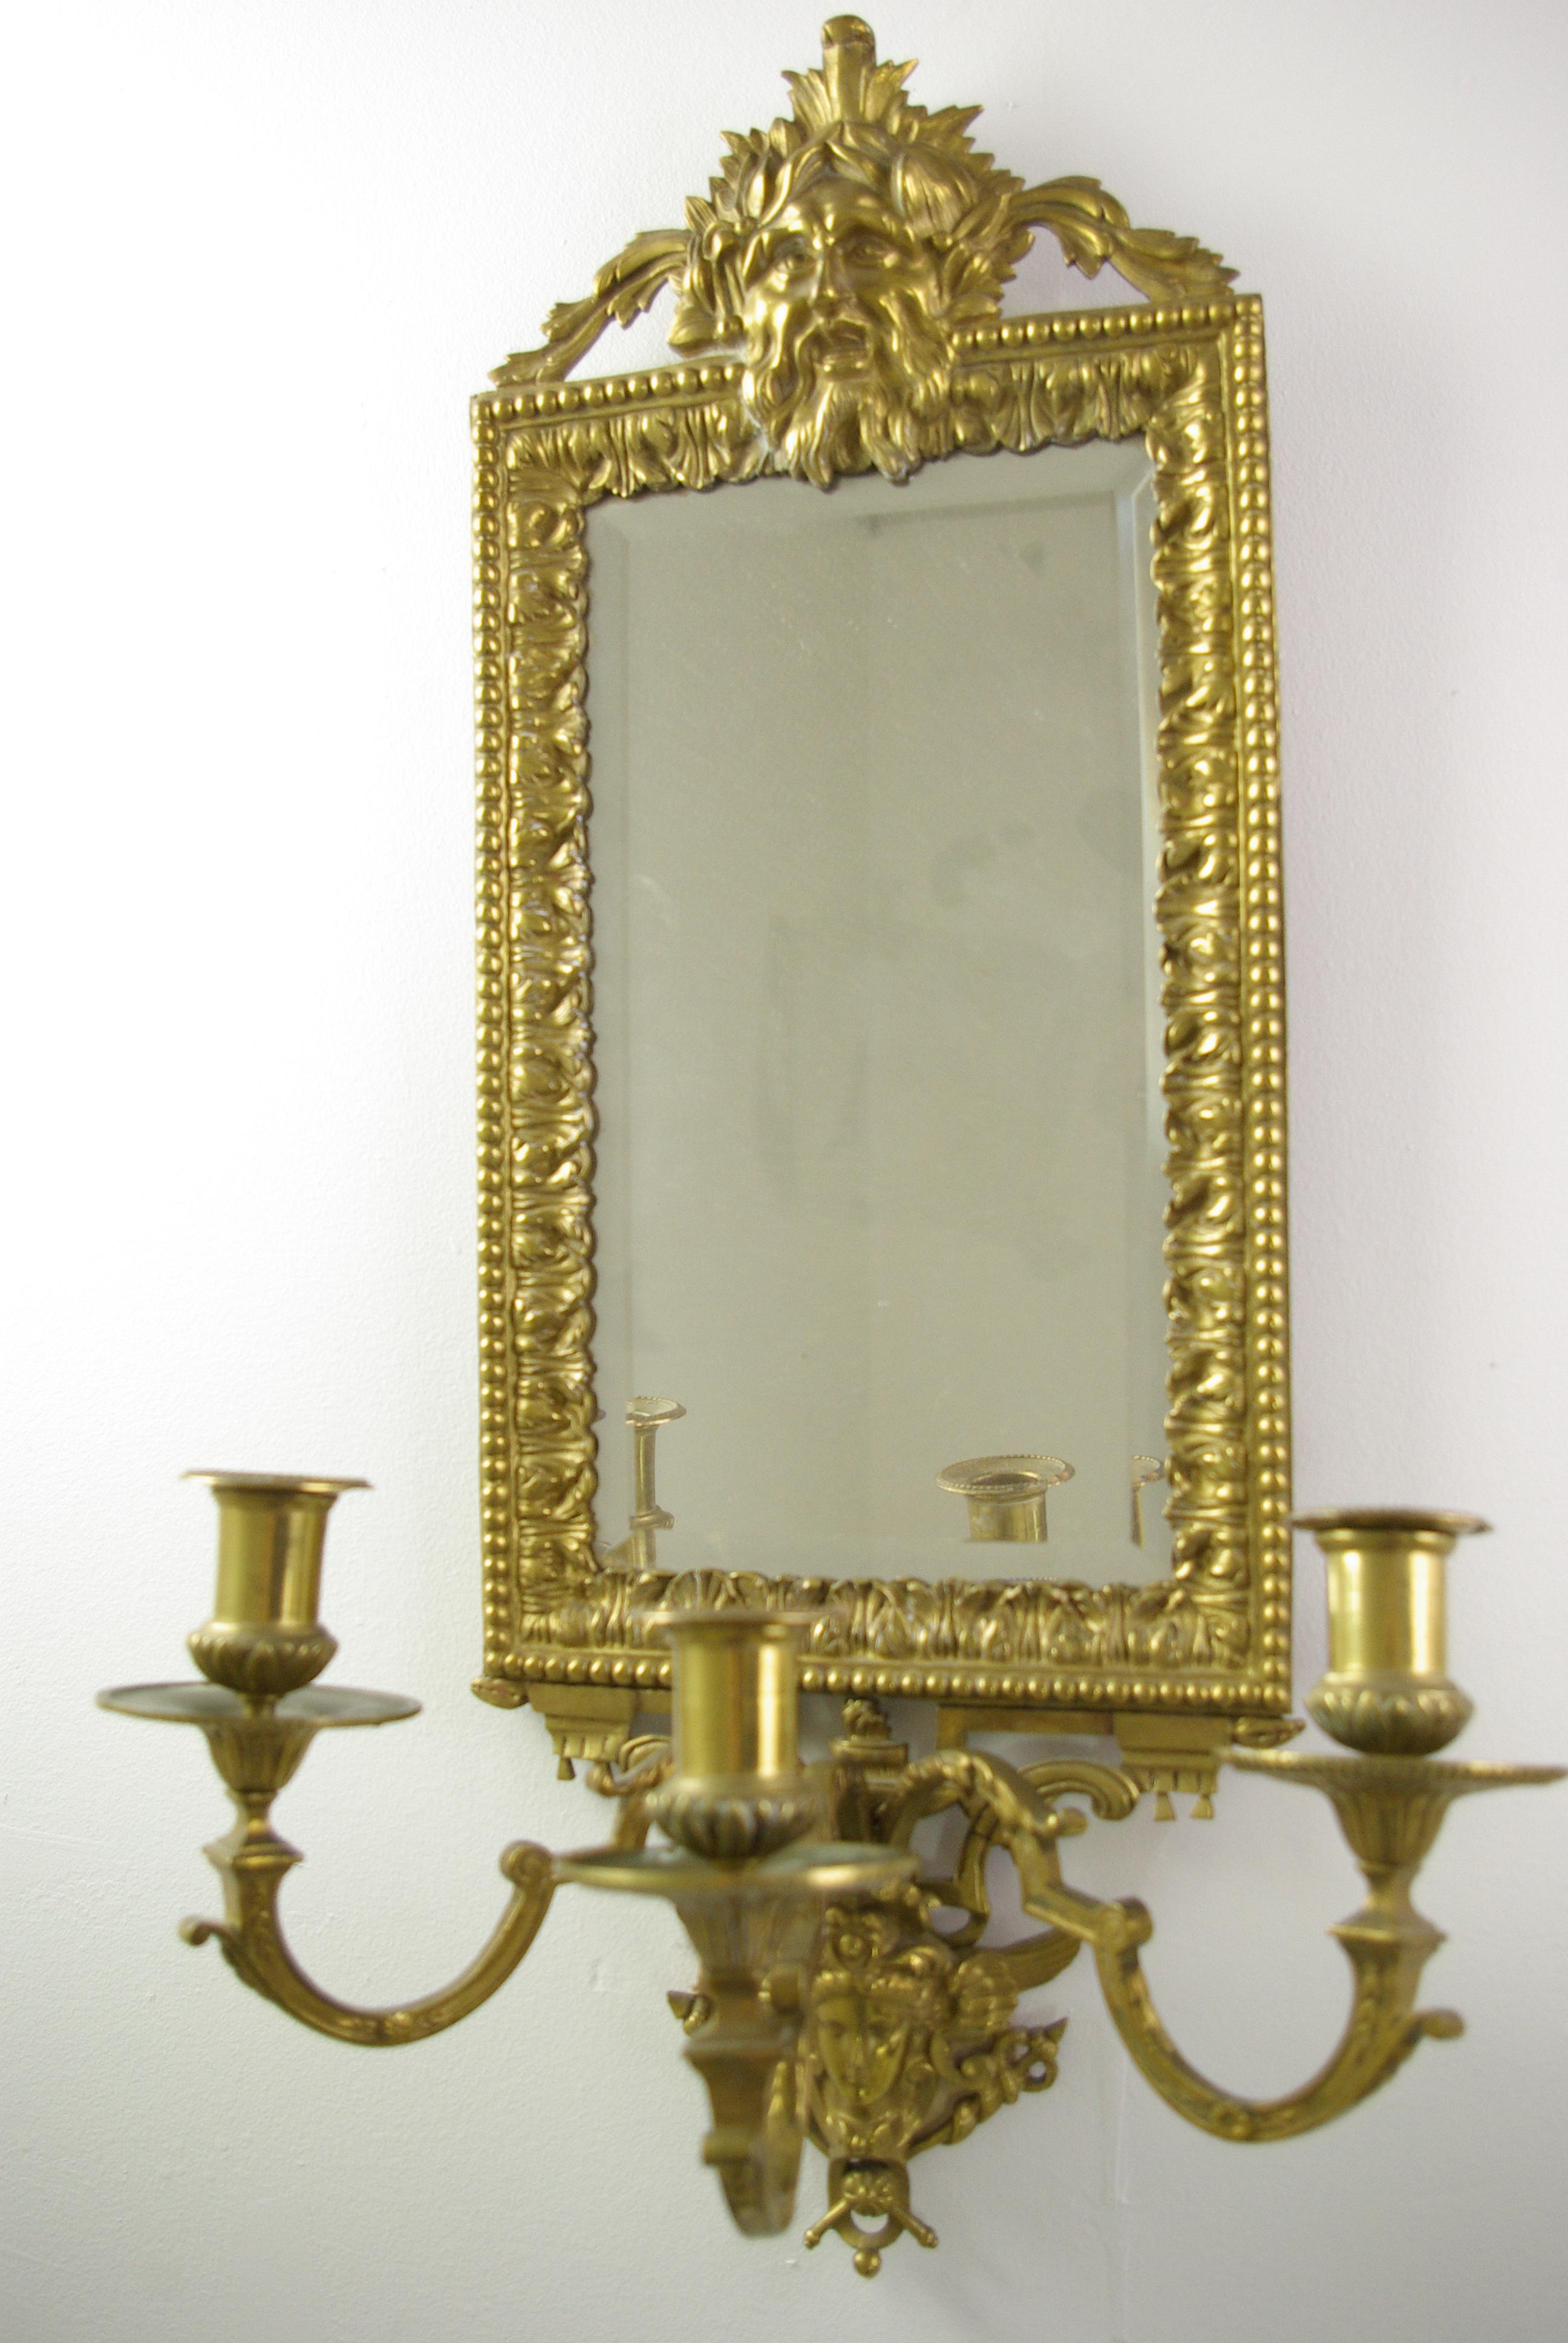 Girandoles mirrors, pair brass mirrors, Rococo mirror, Victorian, Antique Furniture, France, 1870, B1443

France, 1870
Cast brass frames with intricate design
Crested sunburst mask above
Three branch candleholders with fitted sconces
Angel